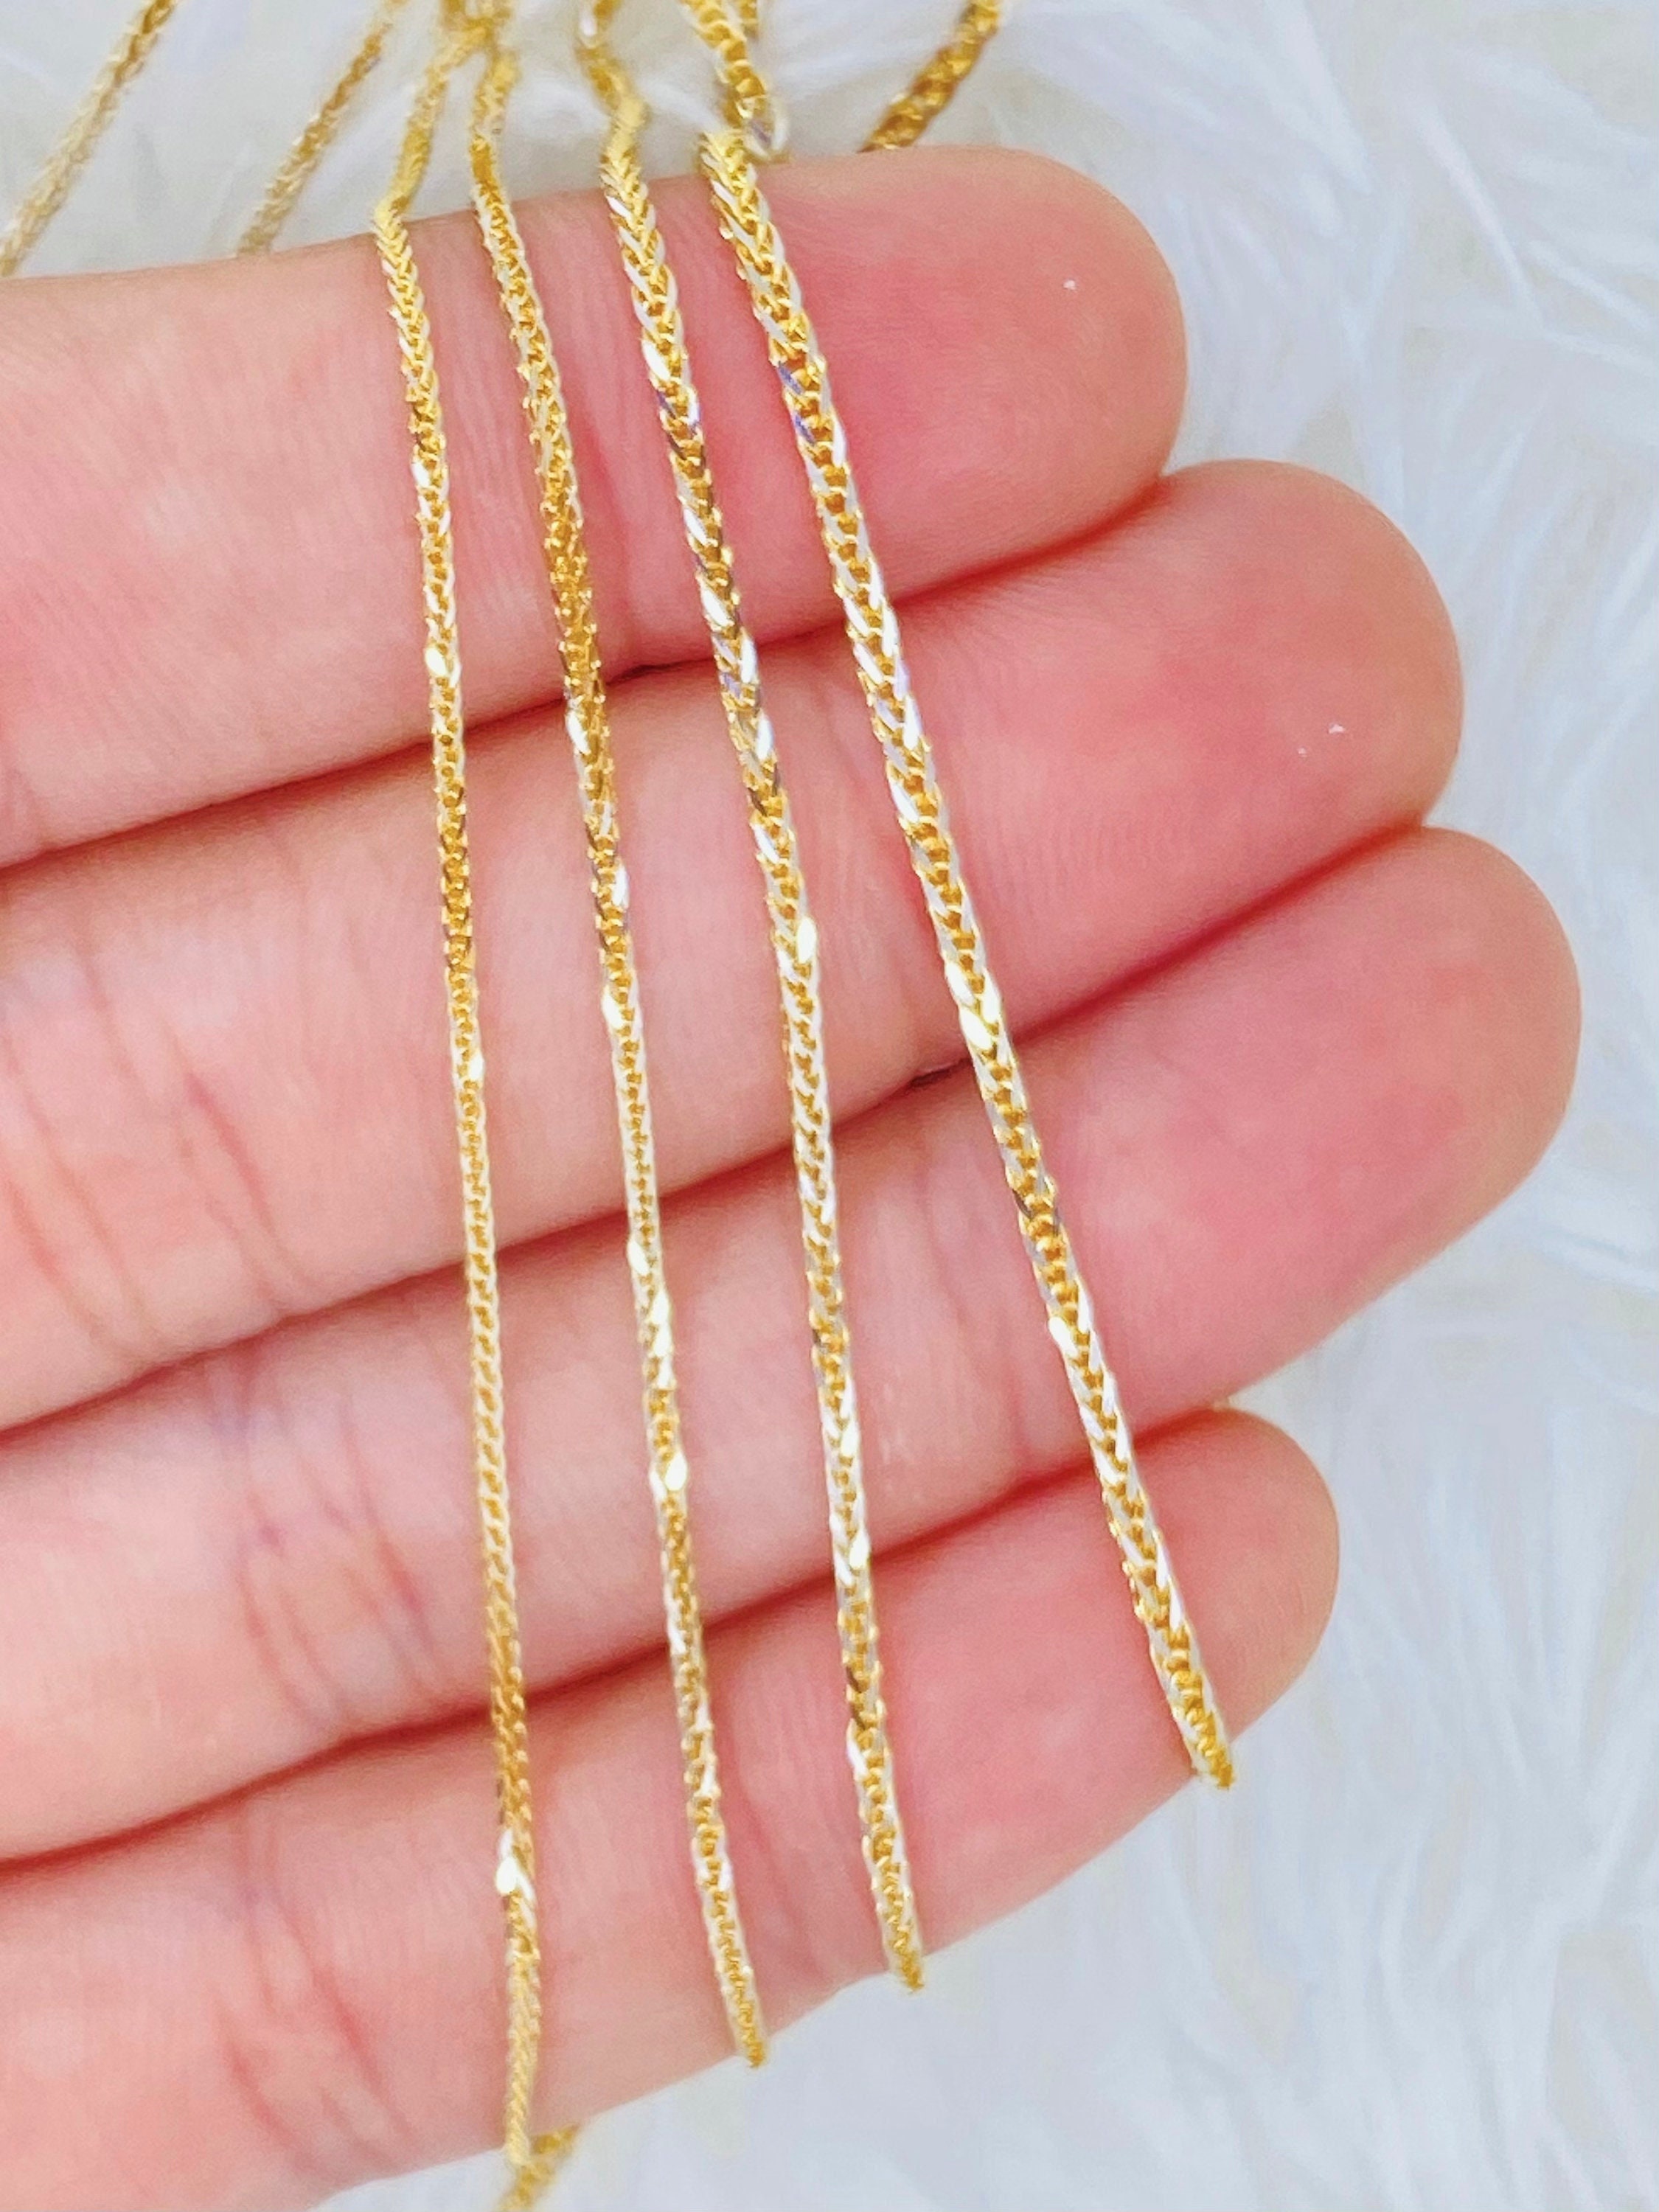 Gold Wheat Chain Necklace 17.7 Inch 1.2mm Thickness Delicate Gold Chain  Jewelry Making Ready to Wear Chain for Woman,wa-375 